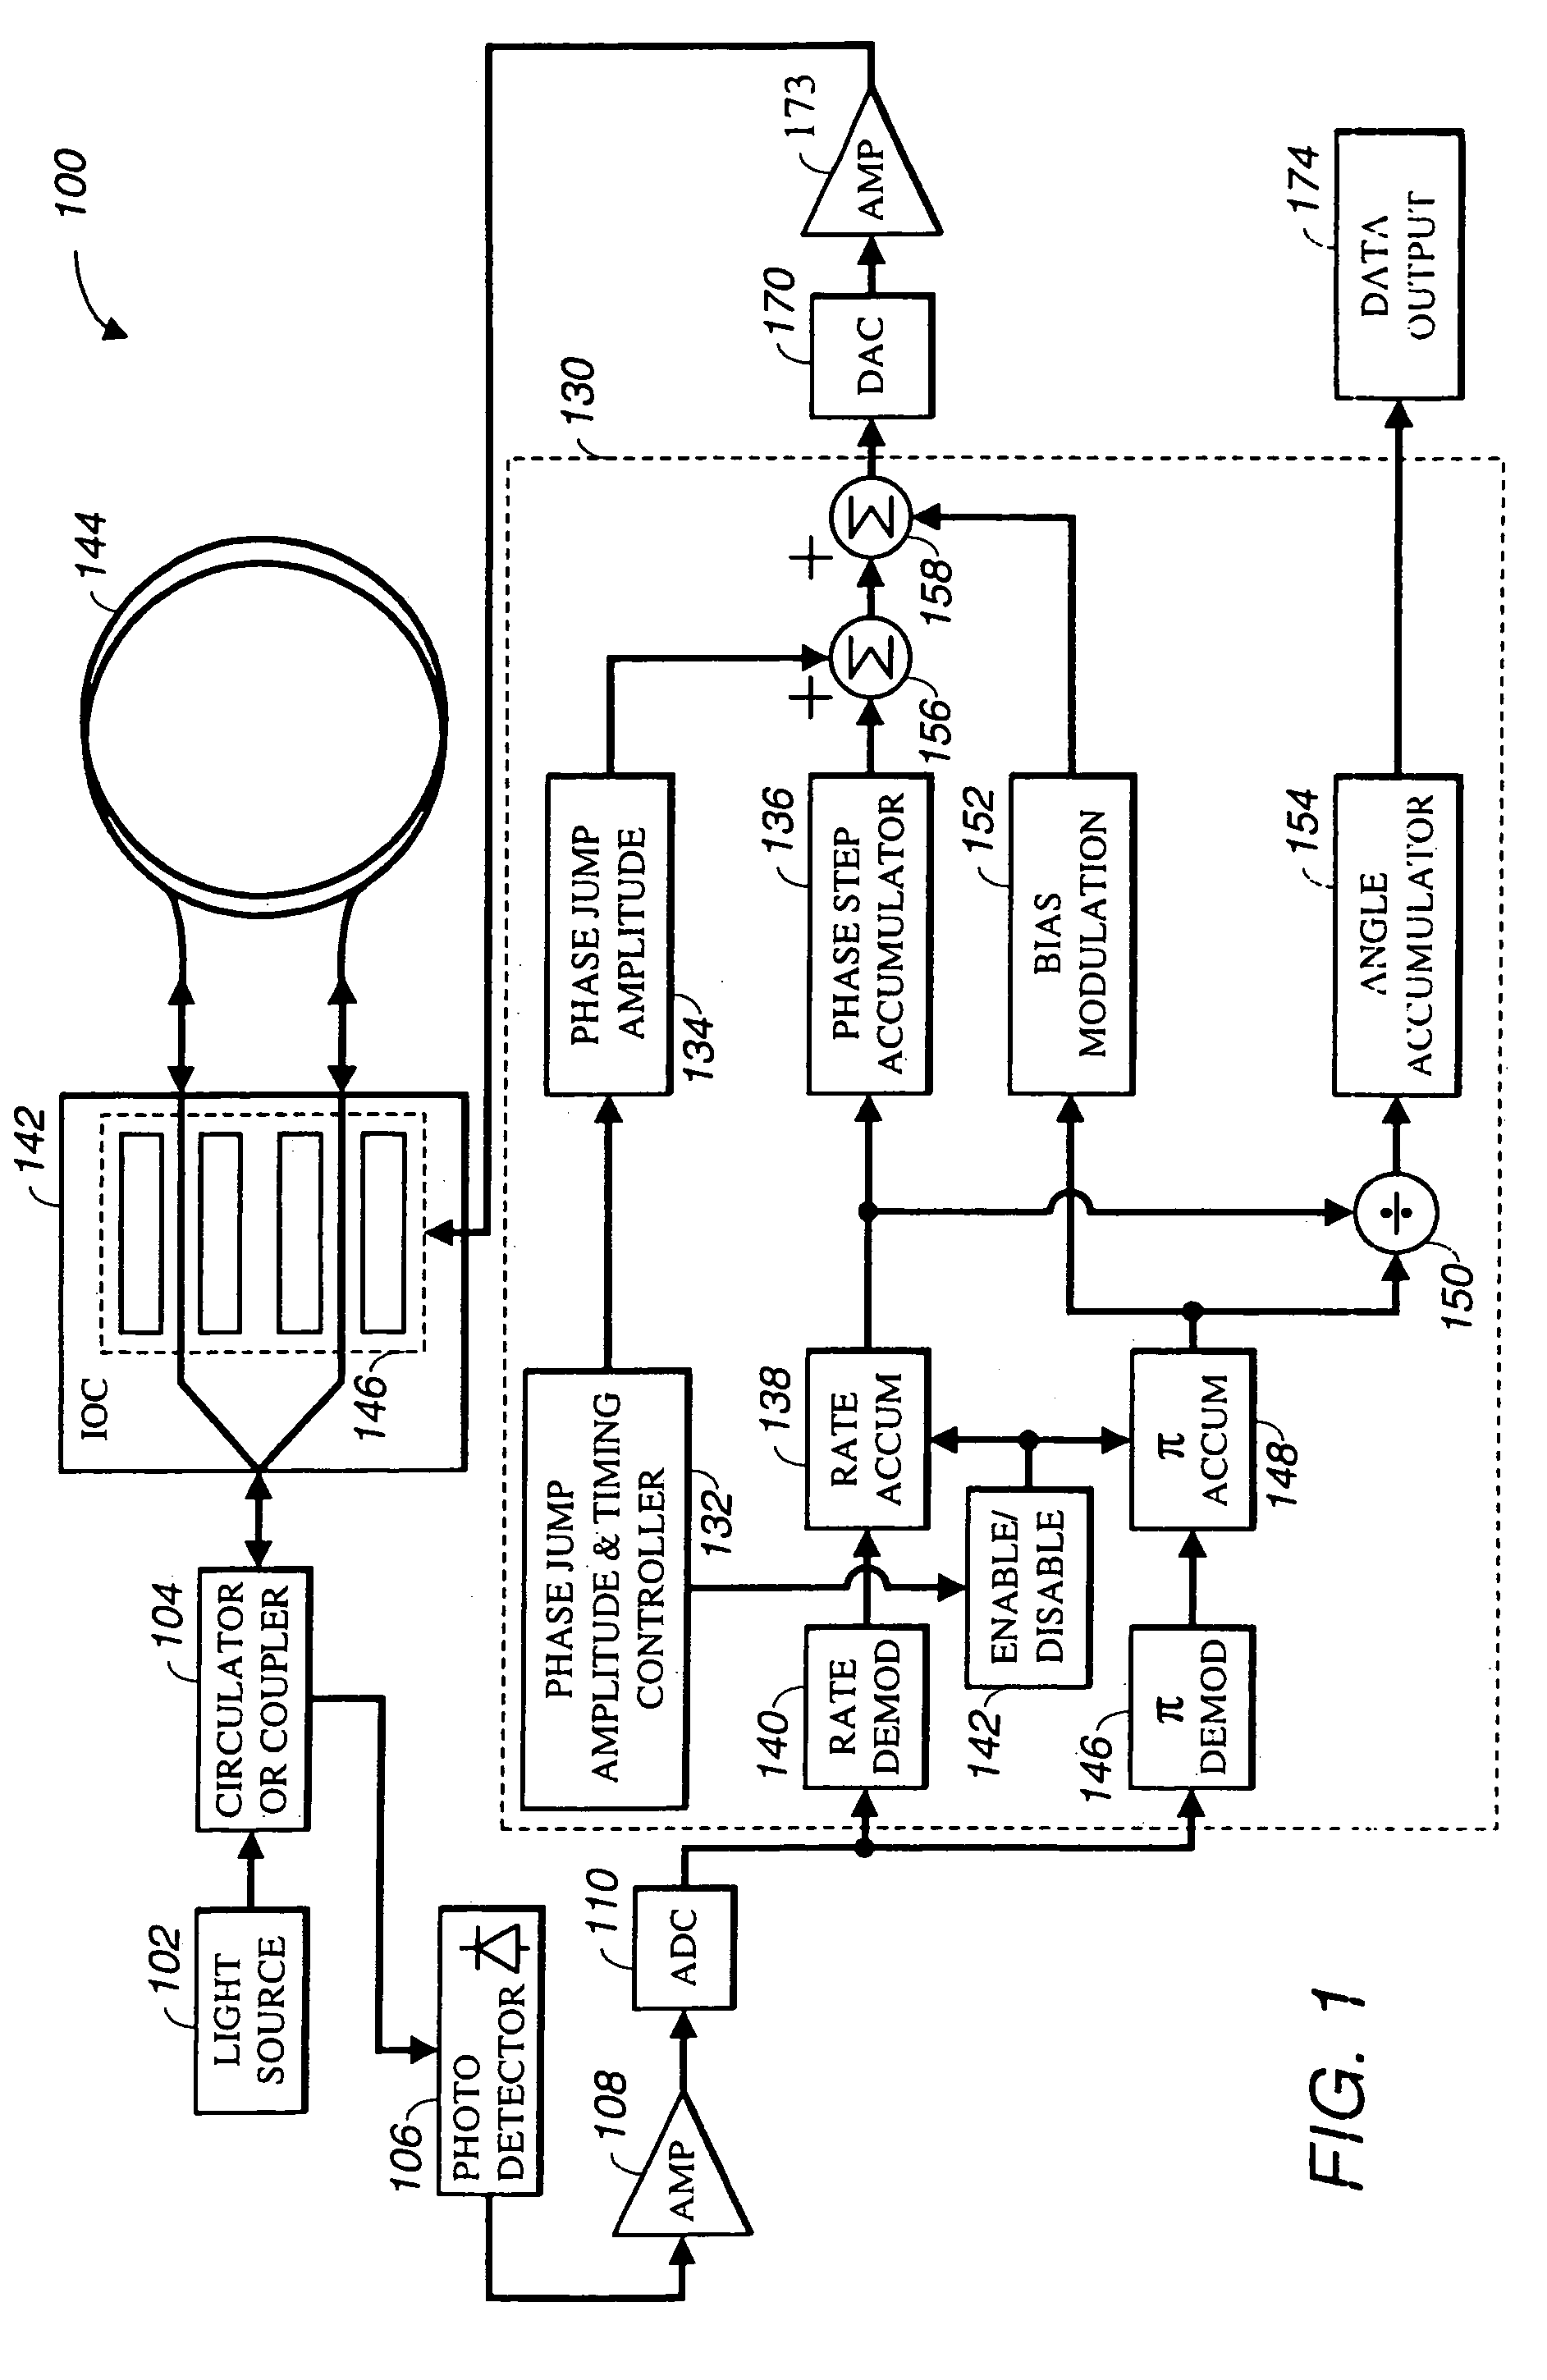 System and method for reducing fiber optic gyroscope color noise